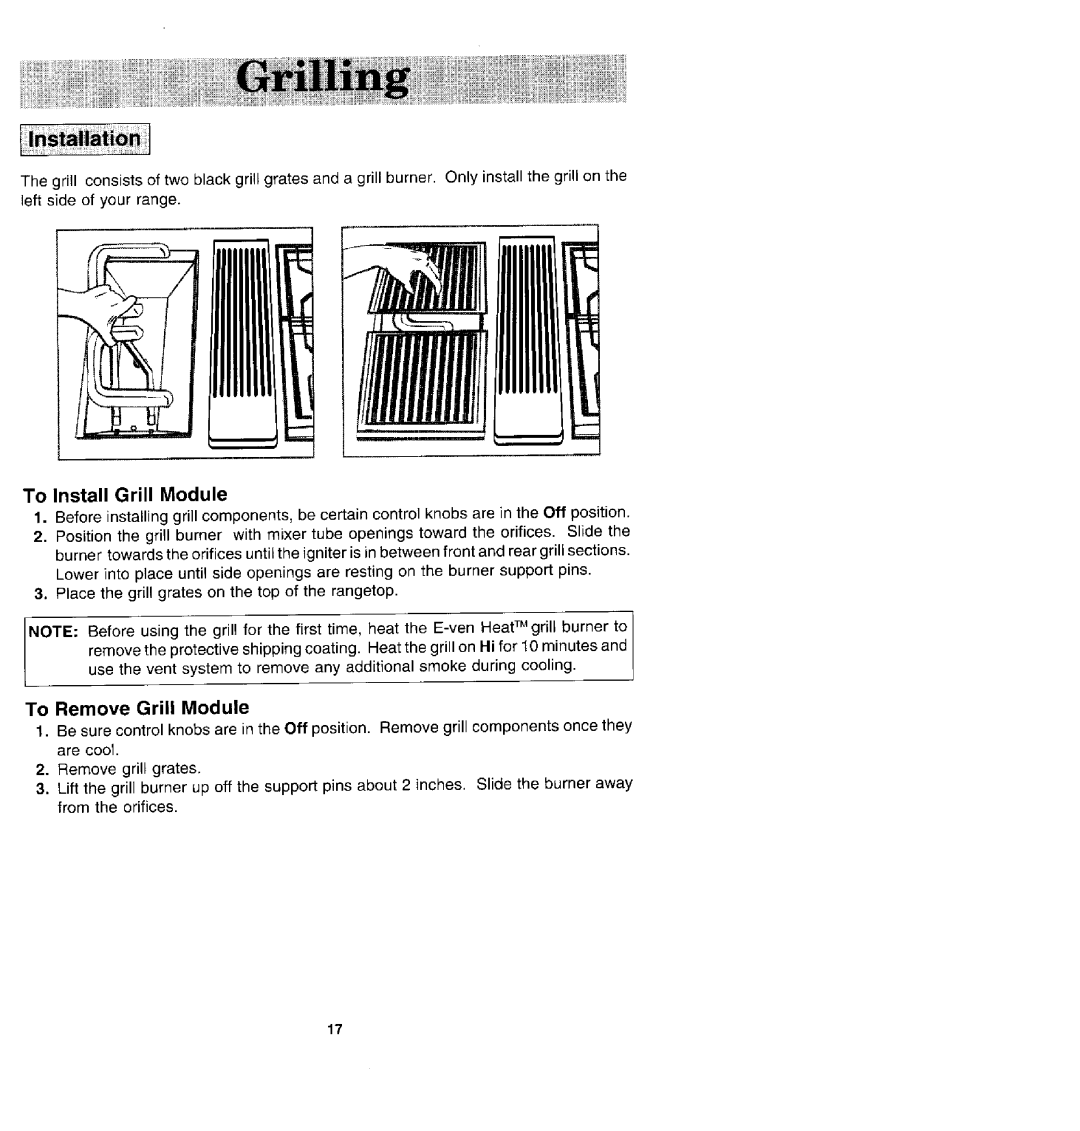 Jenn-Air SDV48600P manual To Install Grill Module, To Remove Grill Module 